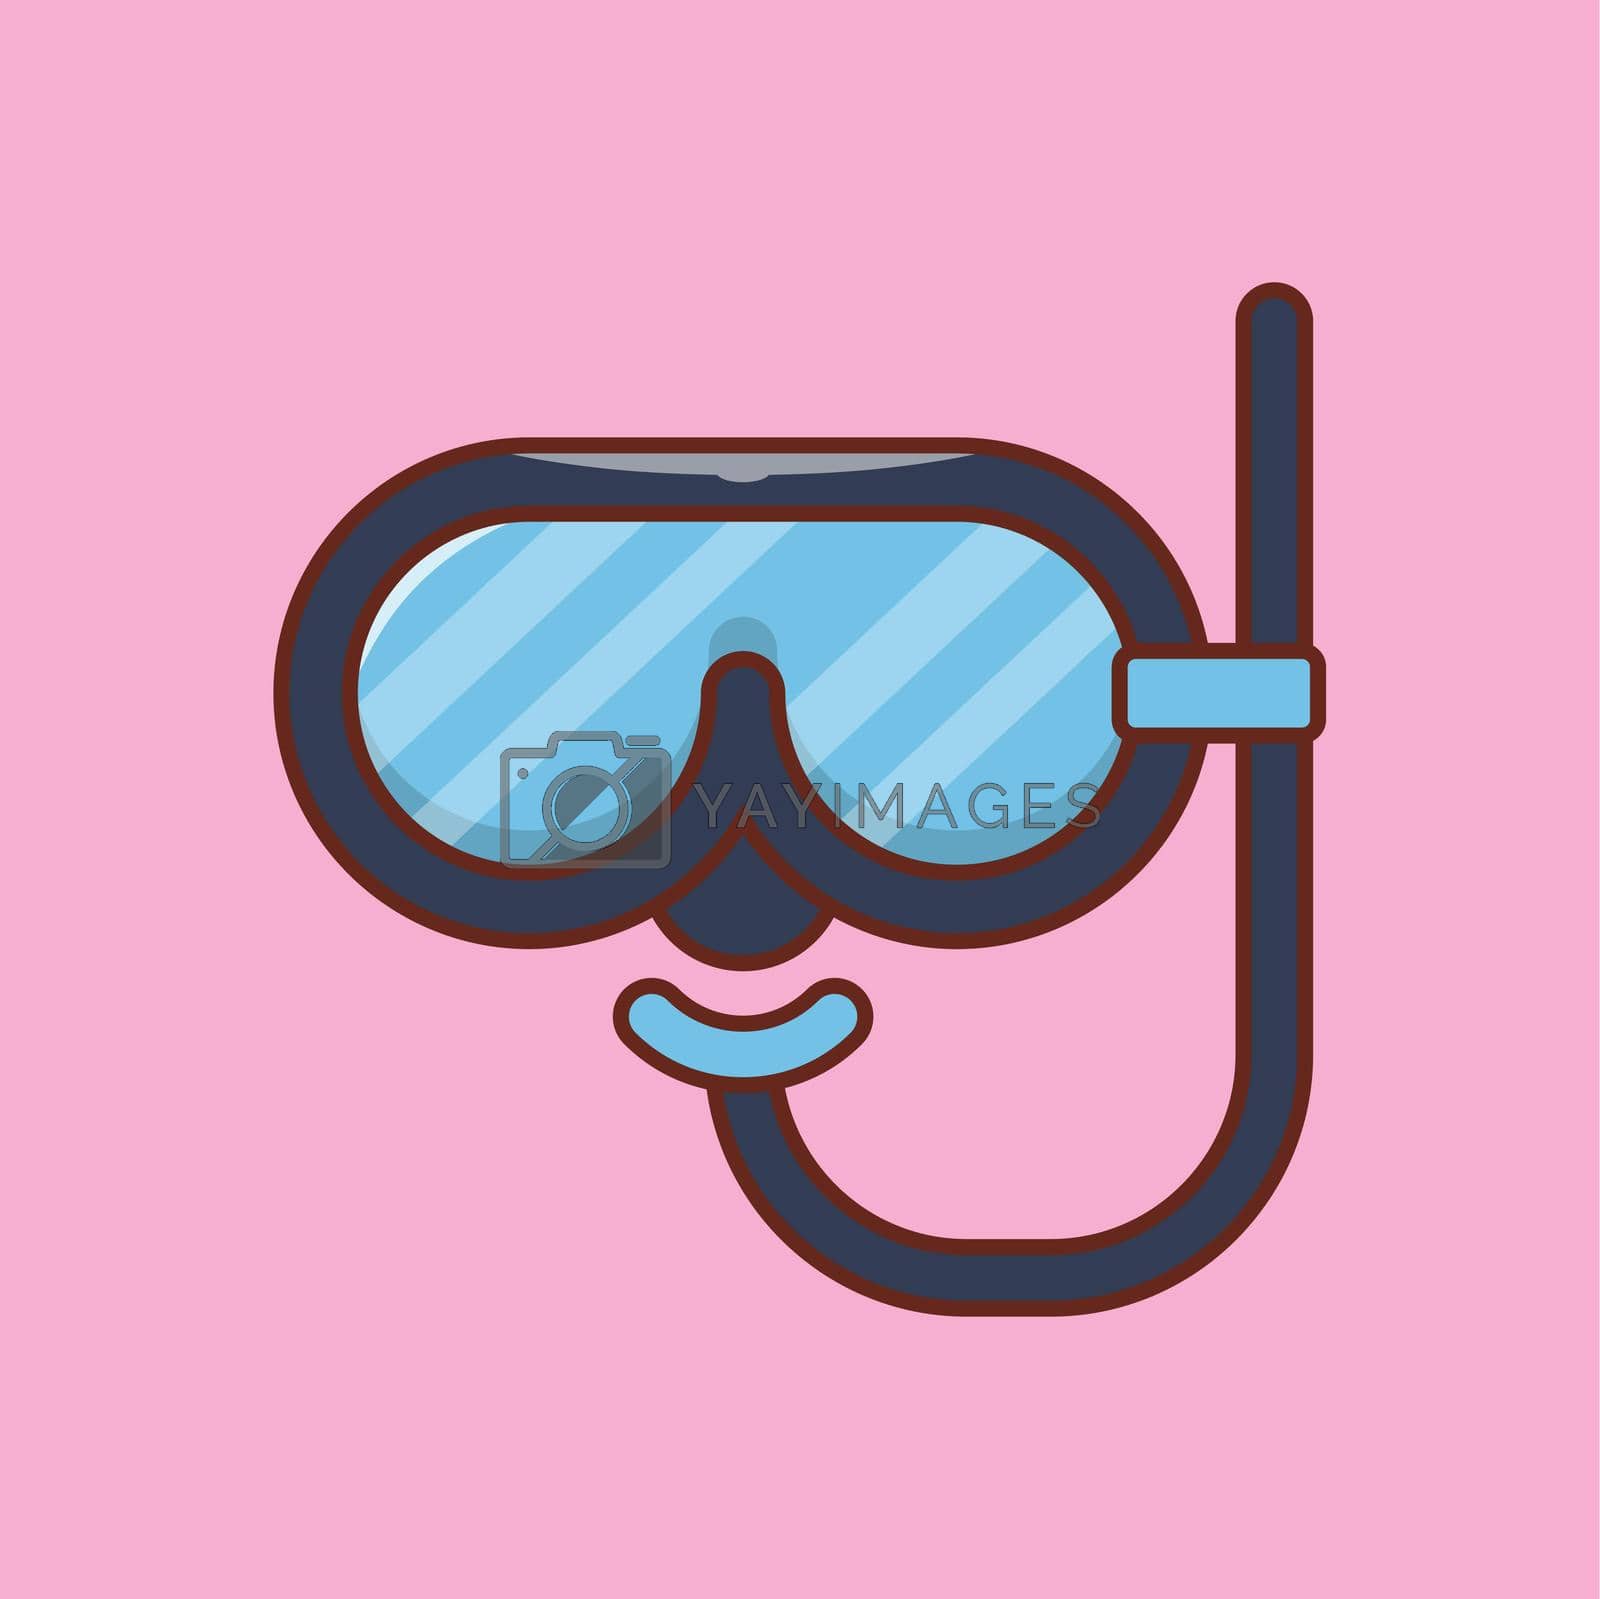 Royalty free image of snorkel by vectorstall